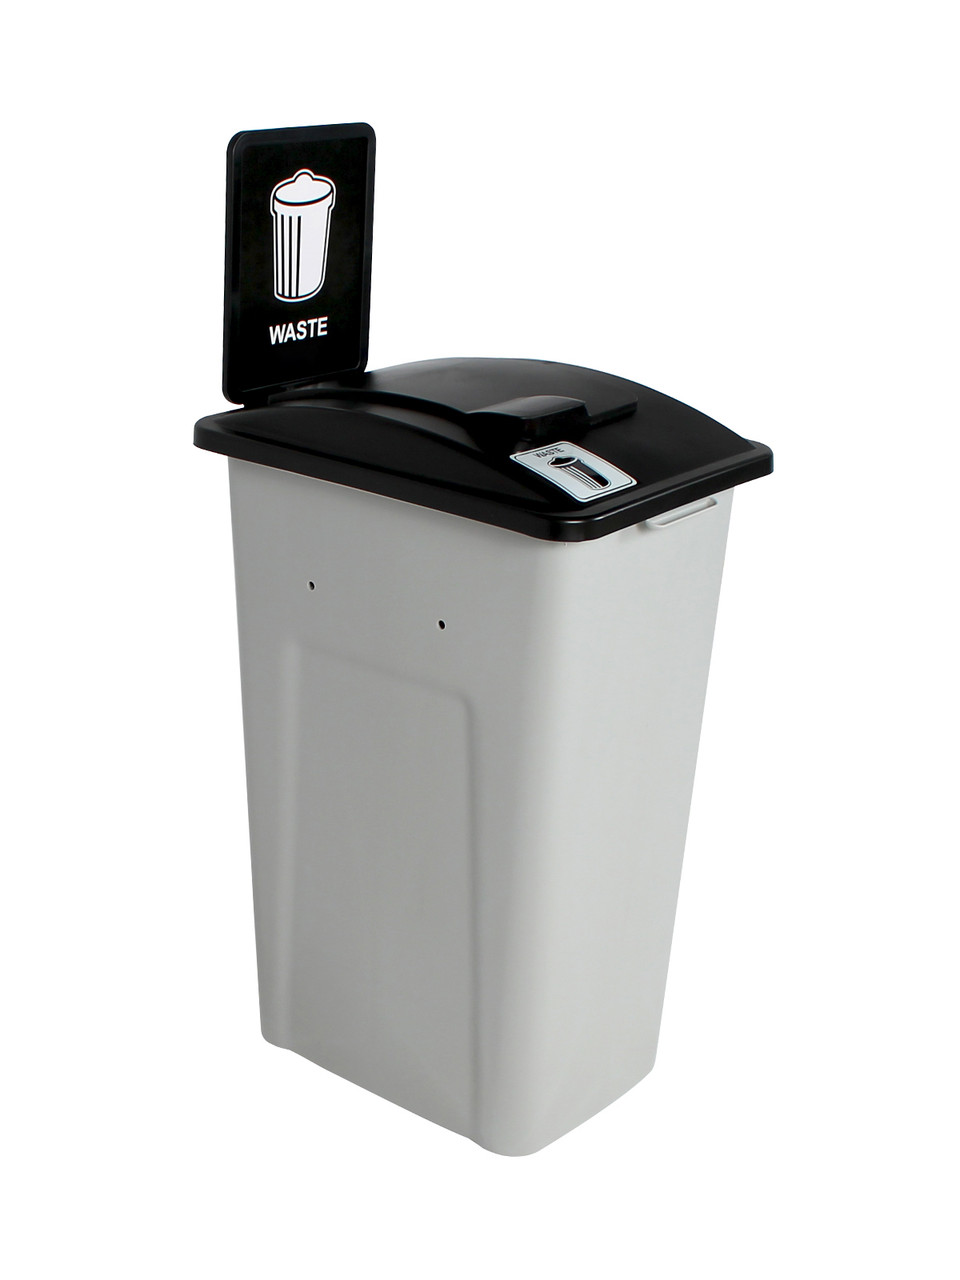 32 Gallon XL Simple Sort Waste Can with Sign (Waste, Lift Top)